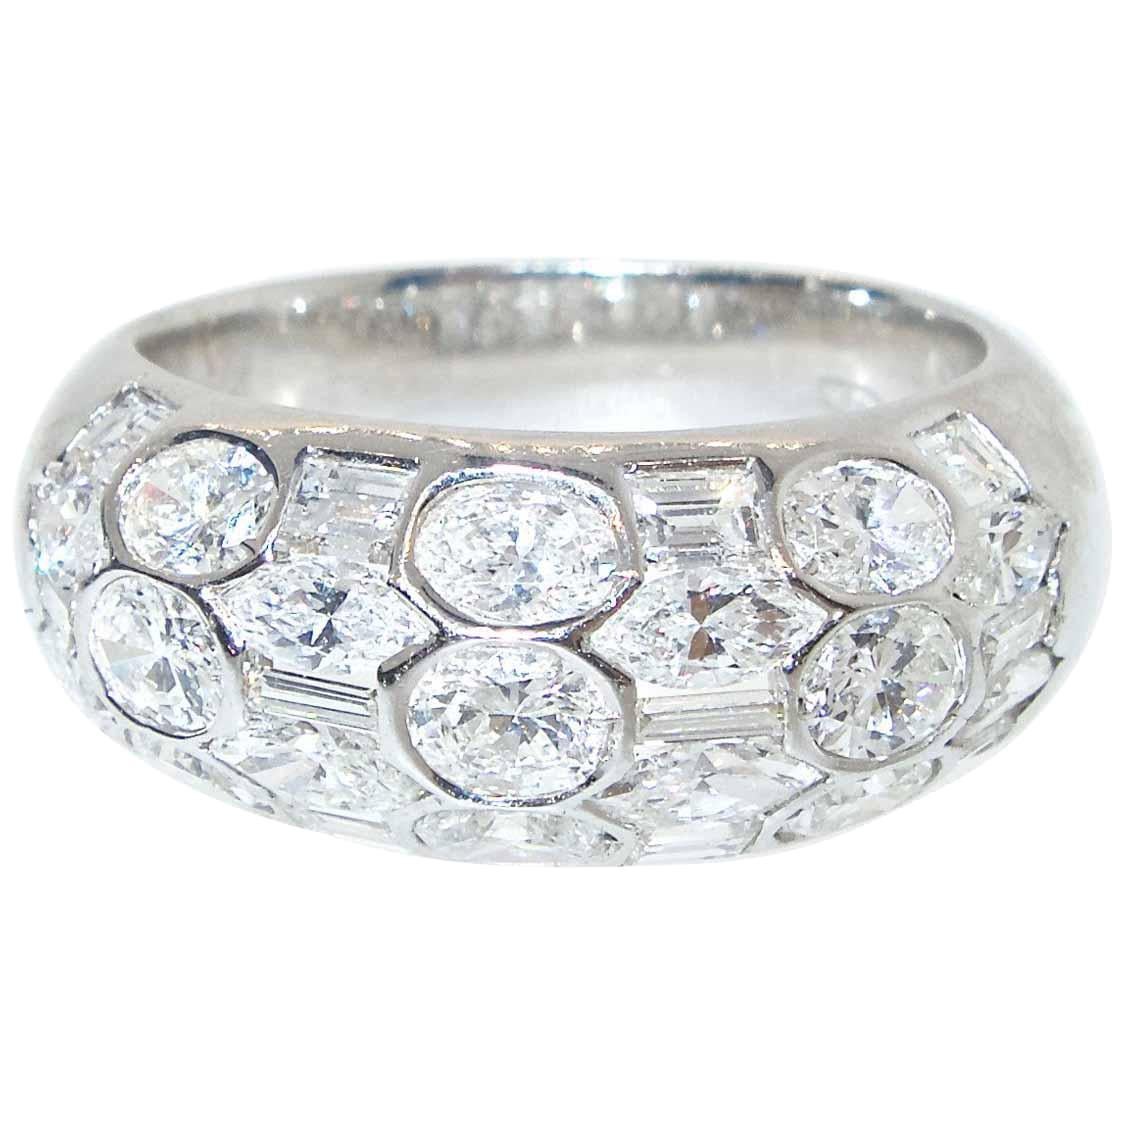 Beaudry Fancy Cut Diamond Gold Band Ring